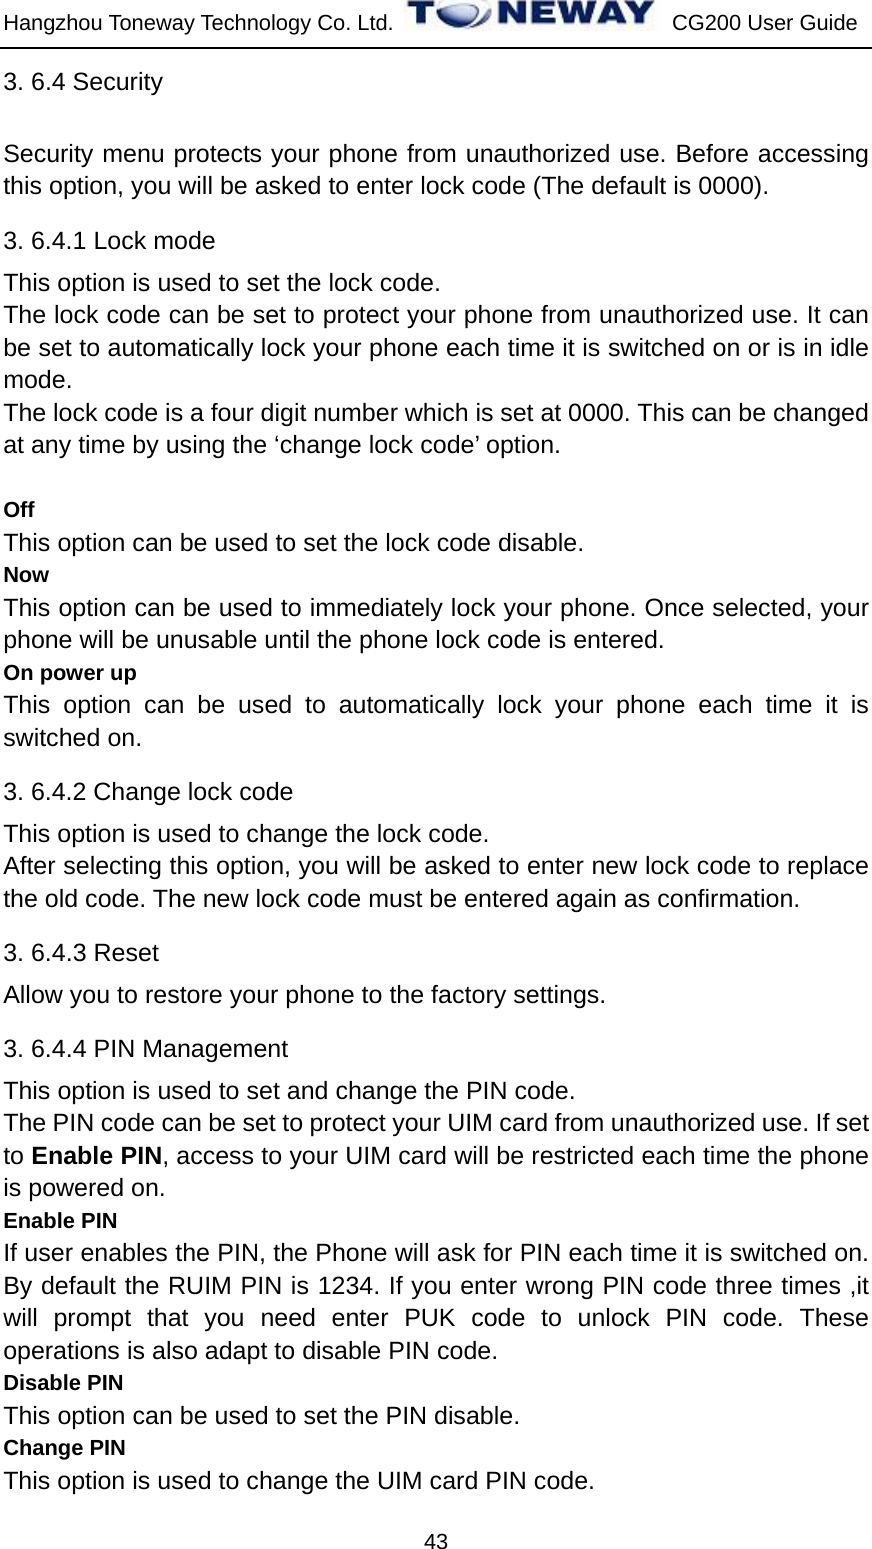 Hangzhou Toneway Technology Co. Ltd.    CG200 User Guide 43 3. 6.4 Security   Security menu protects your phone from unauthorized use. Before accessing this option, you will be asked to enter lock code (The default is 0000). 3. 6.4.1 Lock mode This option is used to set the lock code. The lock code can be set to protect your phone from unauthorized use. It can be set to automatically lock your phone each time it is switched on or is in idle mode. The lock code is a four digit number which is set at 0000. This can be changed at any time by using the ‘change lock code’ option.  Off This option can be used to set the lock code disable. Now This option can be used to immediately lock your phone. Once selected, your phone will be unusable until the phone lock code is entered. On power up This option can be used to automatically lock your phone each time it is switched on. 3. 6.4.2 Change lock code This option is used to change the lock code. After selecting this option, you will be asked to enter new lock code to replace the old code. The new lock code must be entered again as confirmation. 3. 6.4.3 Reset Allow you to restore your phone to the factory settings. 3. 6.4.4 PIN Management This option is used to set and change the PIN code. The PIN code can be set to protect your UIM card from unauthorized use. If set to Enable PIN, access to your UIM card will be restricted each time the phone is powered on. Enable PIN If user enables the PIN, the Phone will ask for PIN each time it is switched on. By default the RUIM PIN is 1234. If you enter wrong PIN code three times ,it will prompt that you need enter PUK code to unlock PIN code. These operations is also adapt to disable PIN code. Disable PIN This option can be used to set the PIN disable. Change PIN This option is used to change the UIM card PIN code. 